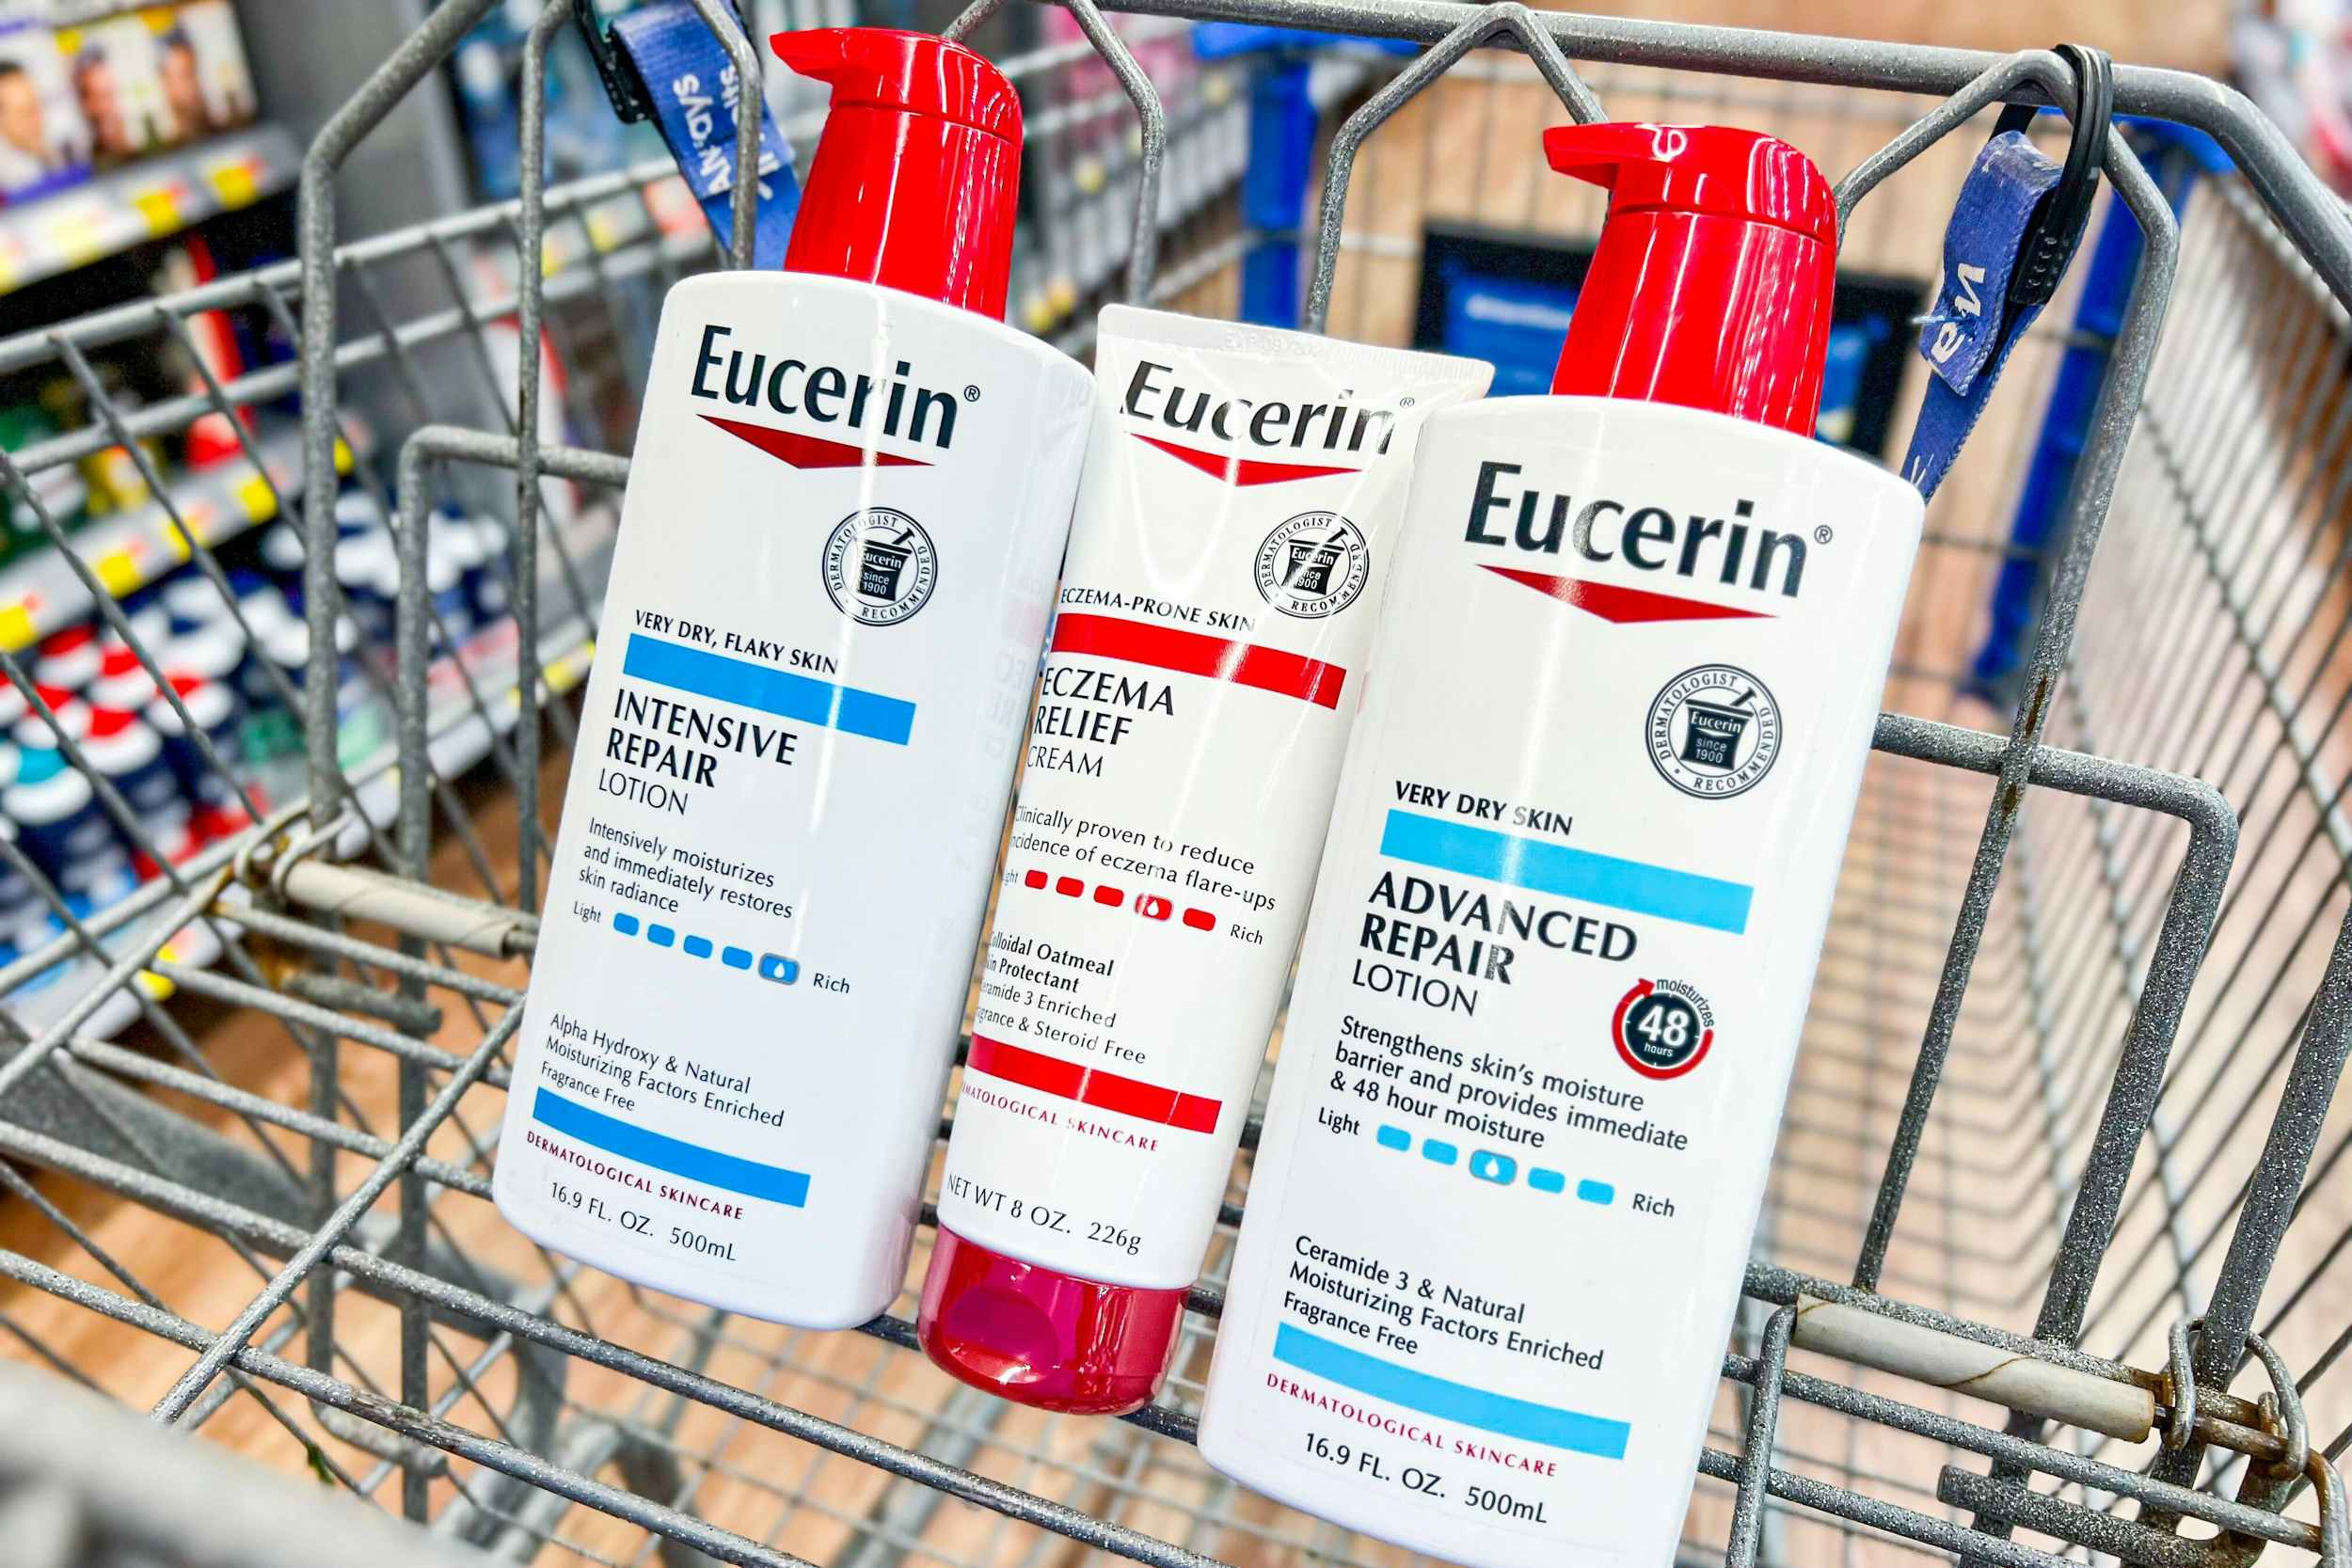 eucerin cream and lotions in a cart at walmart